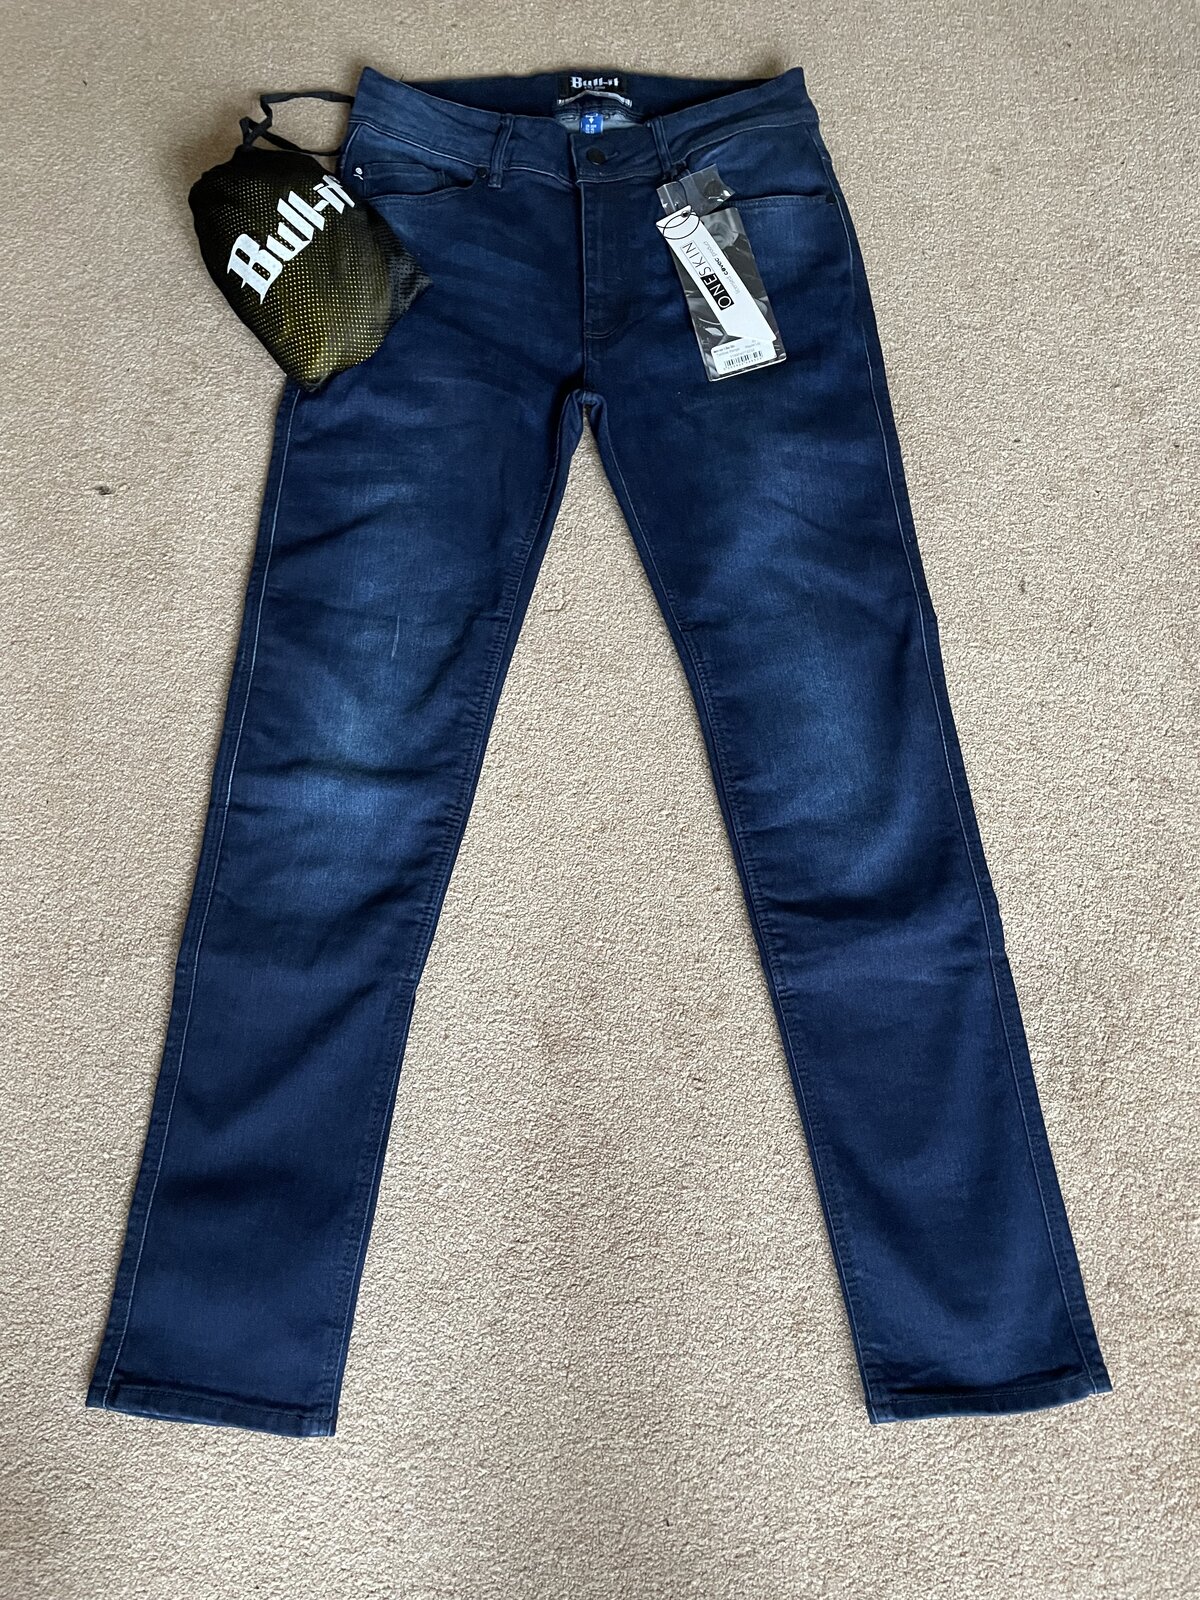 For Sale - Bull-it Motorbike Armoured Jeans, New. | Ducati Forum